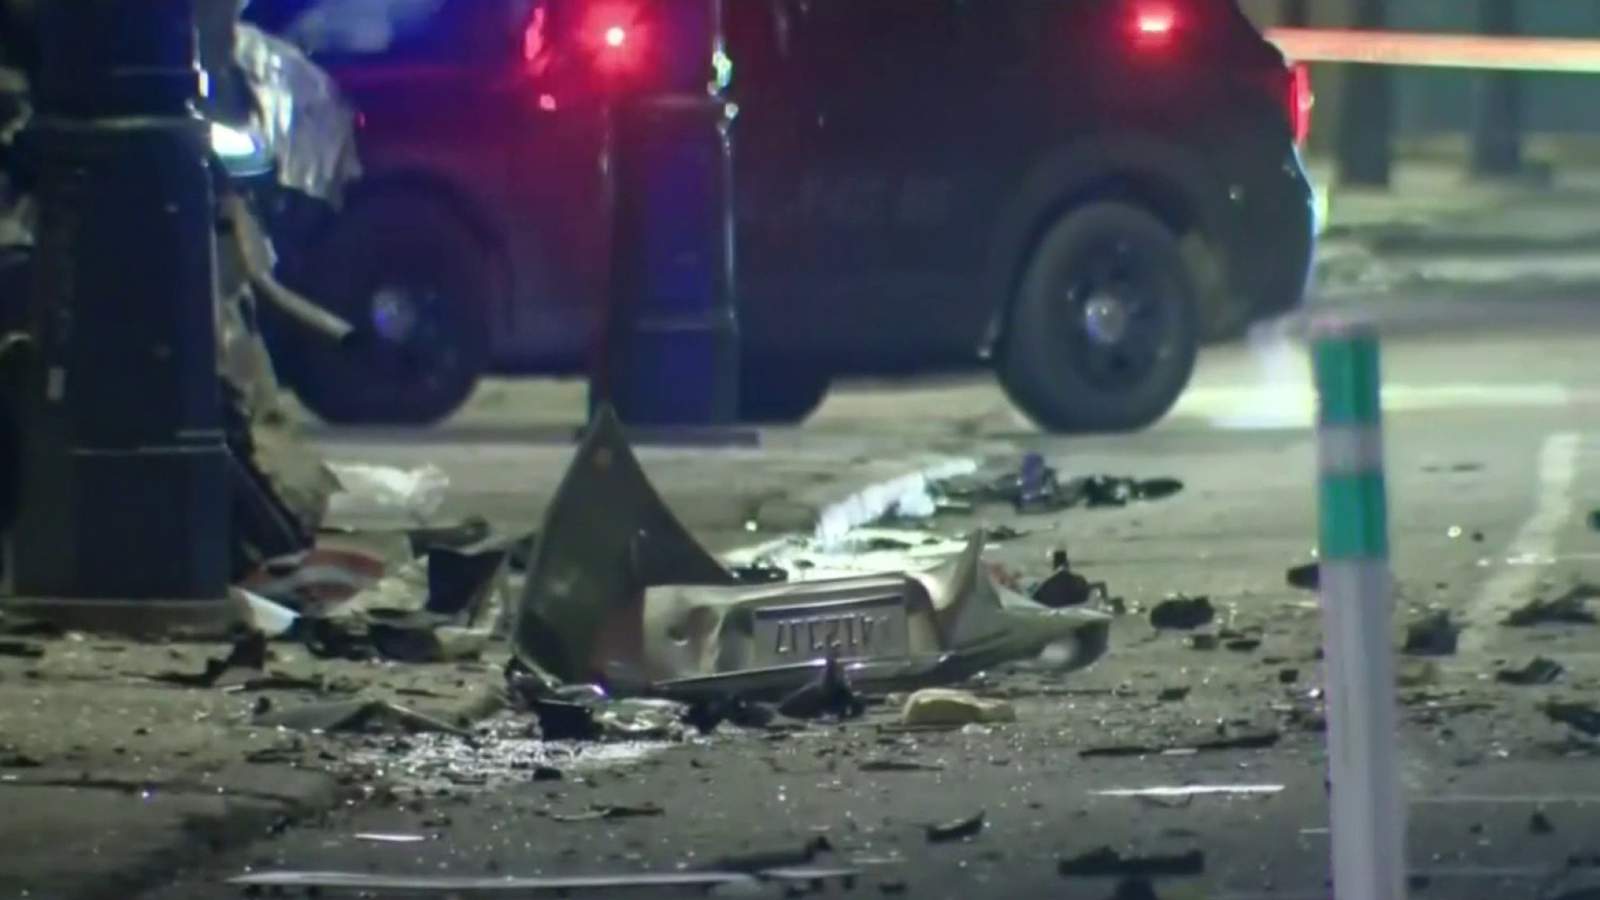 Detroit police search for man in hit-and-run that killed 3 people on New Year’s Eve